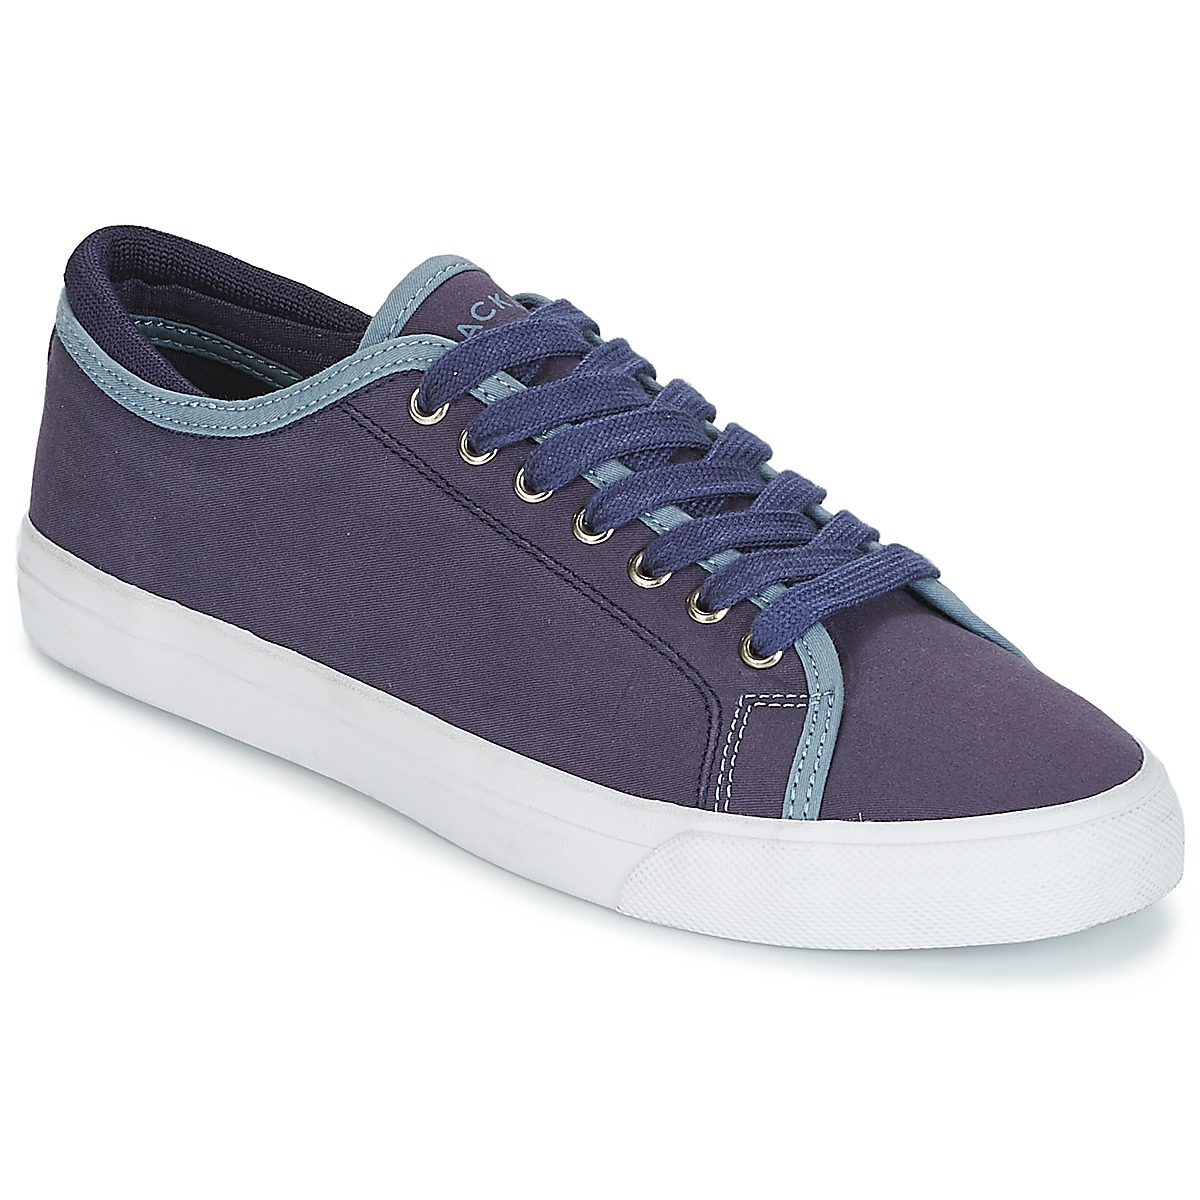 Xαμηλά Sneakers Hackett MR CLASSIC PLIMSOLE Ύφασμα